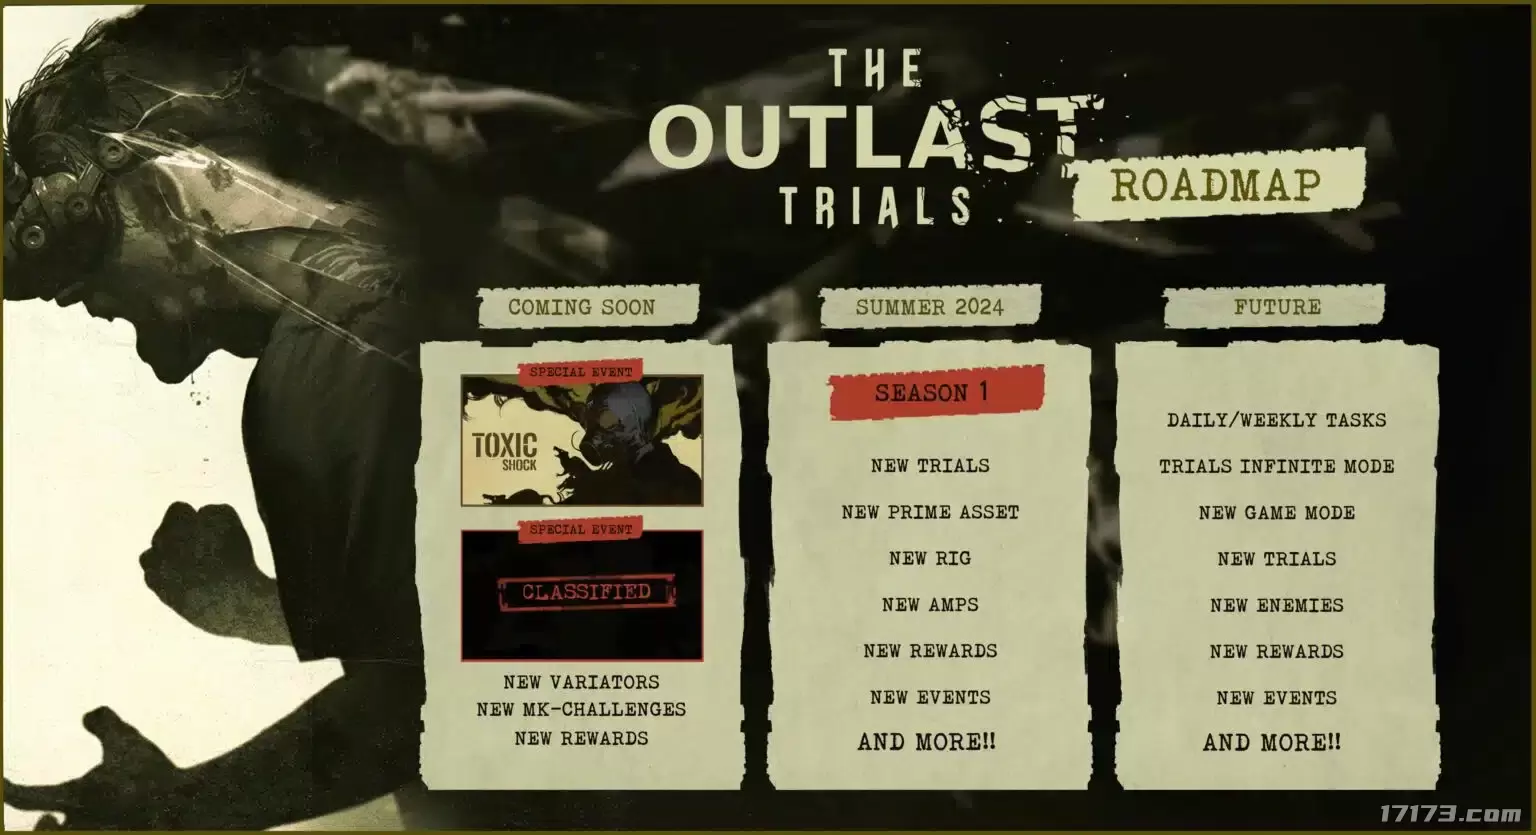 The-Outlast-Trials-Roadmap-1536x835.png